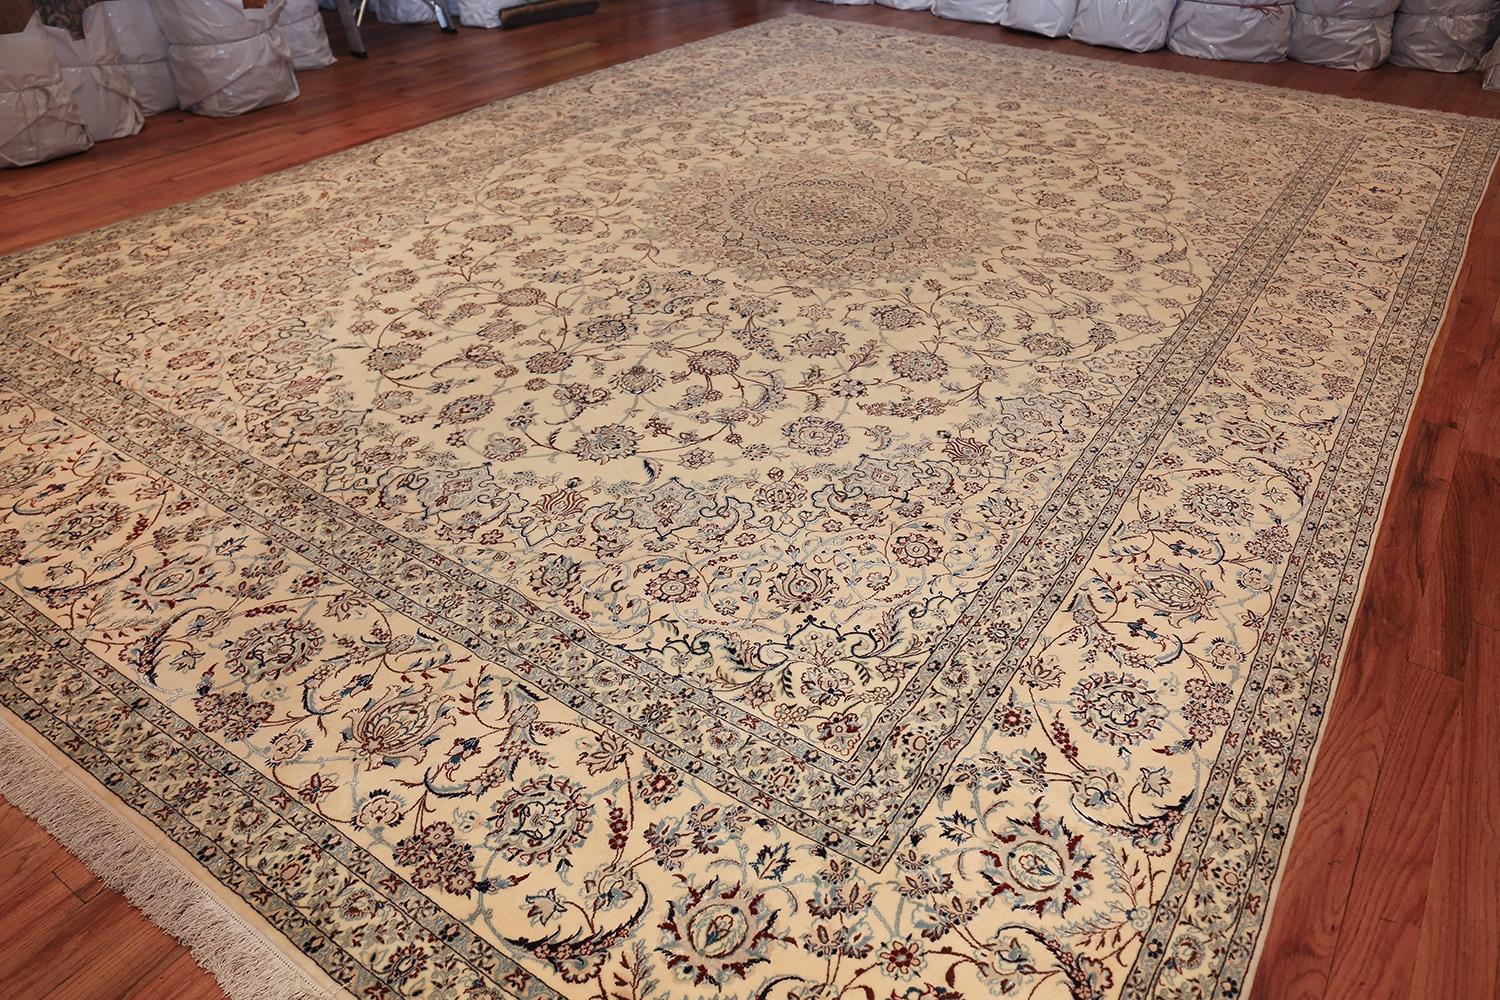 Floral Large Silk and Wool Vintage Nain Persian Rug. Size: 11 ft 6 in x 17 ft 5